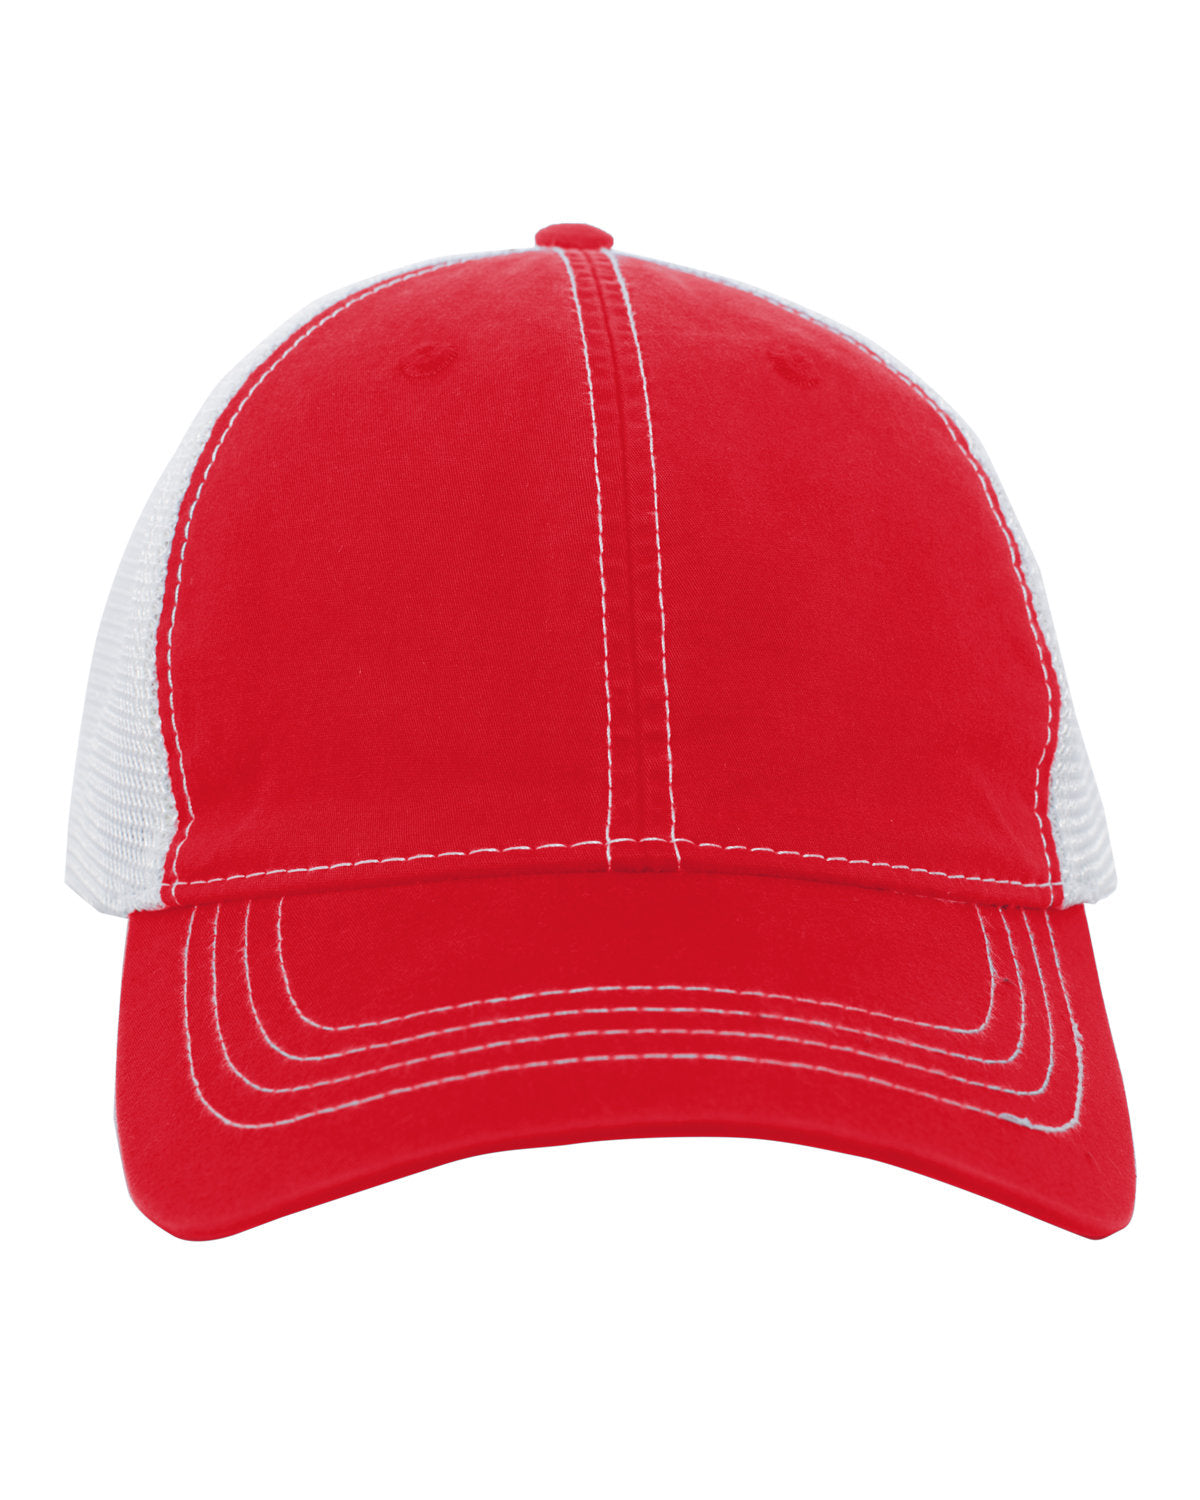 V67-PacificHeadwear-52-RED_WHITE-OS